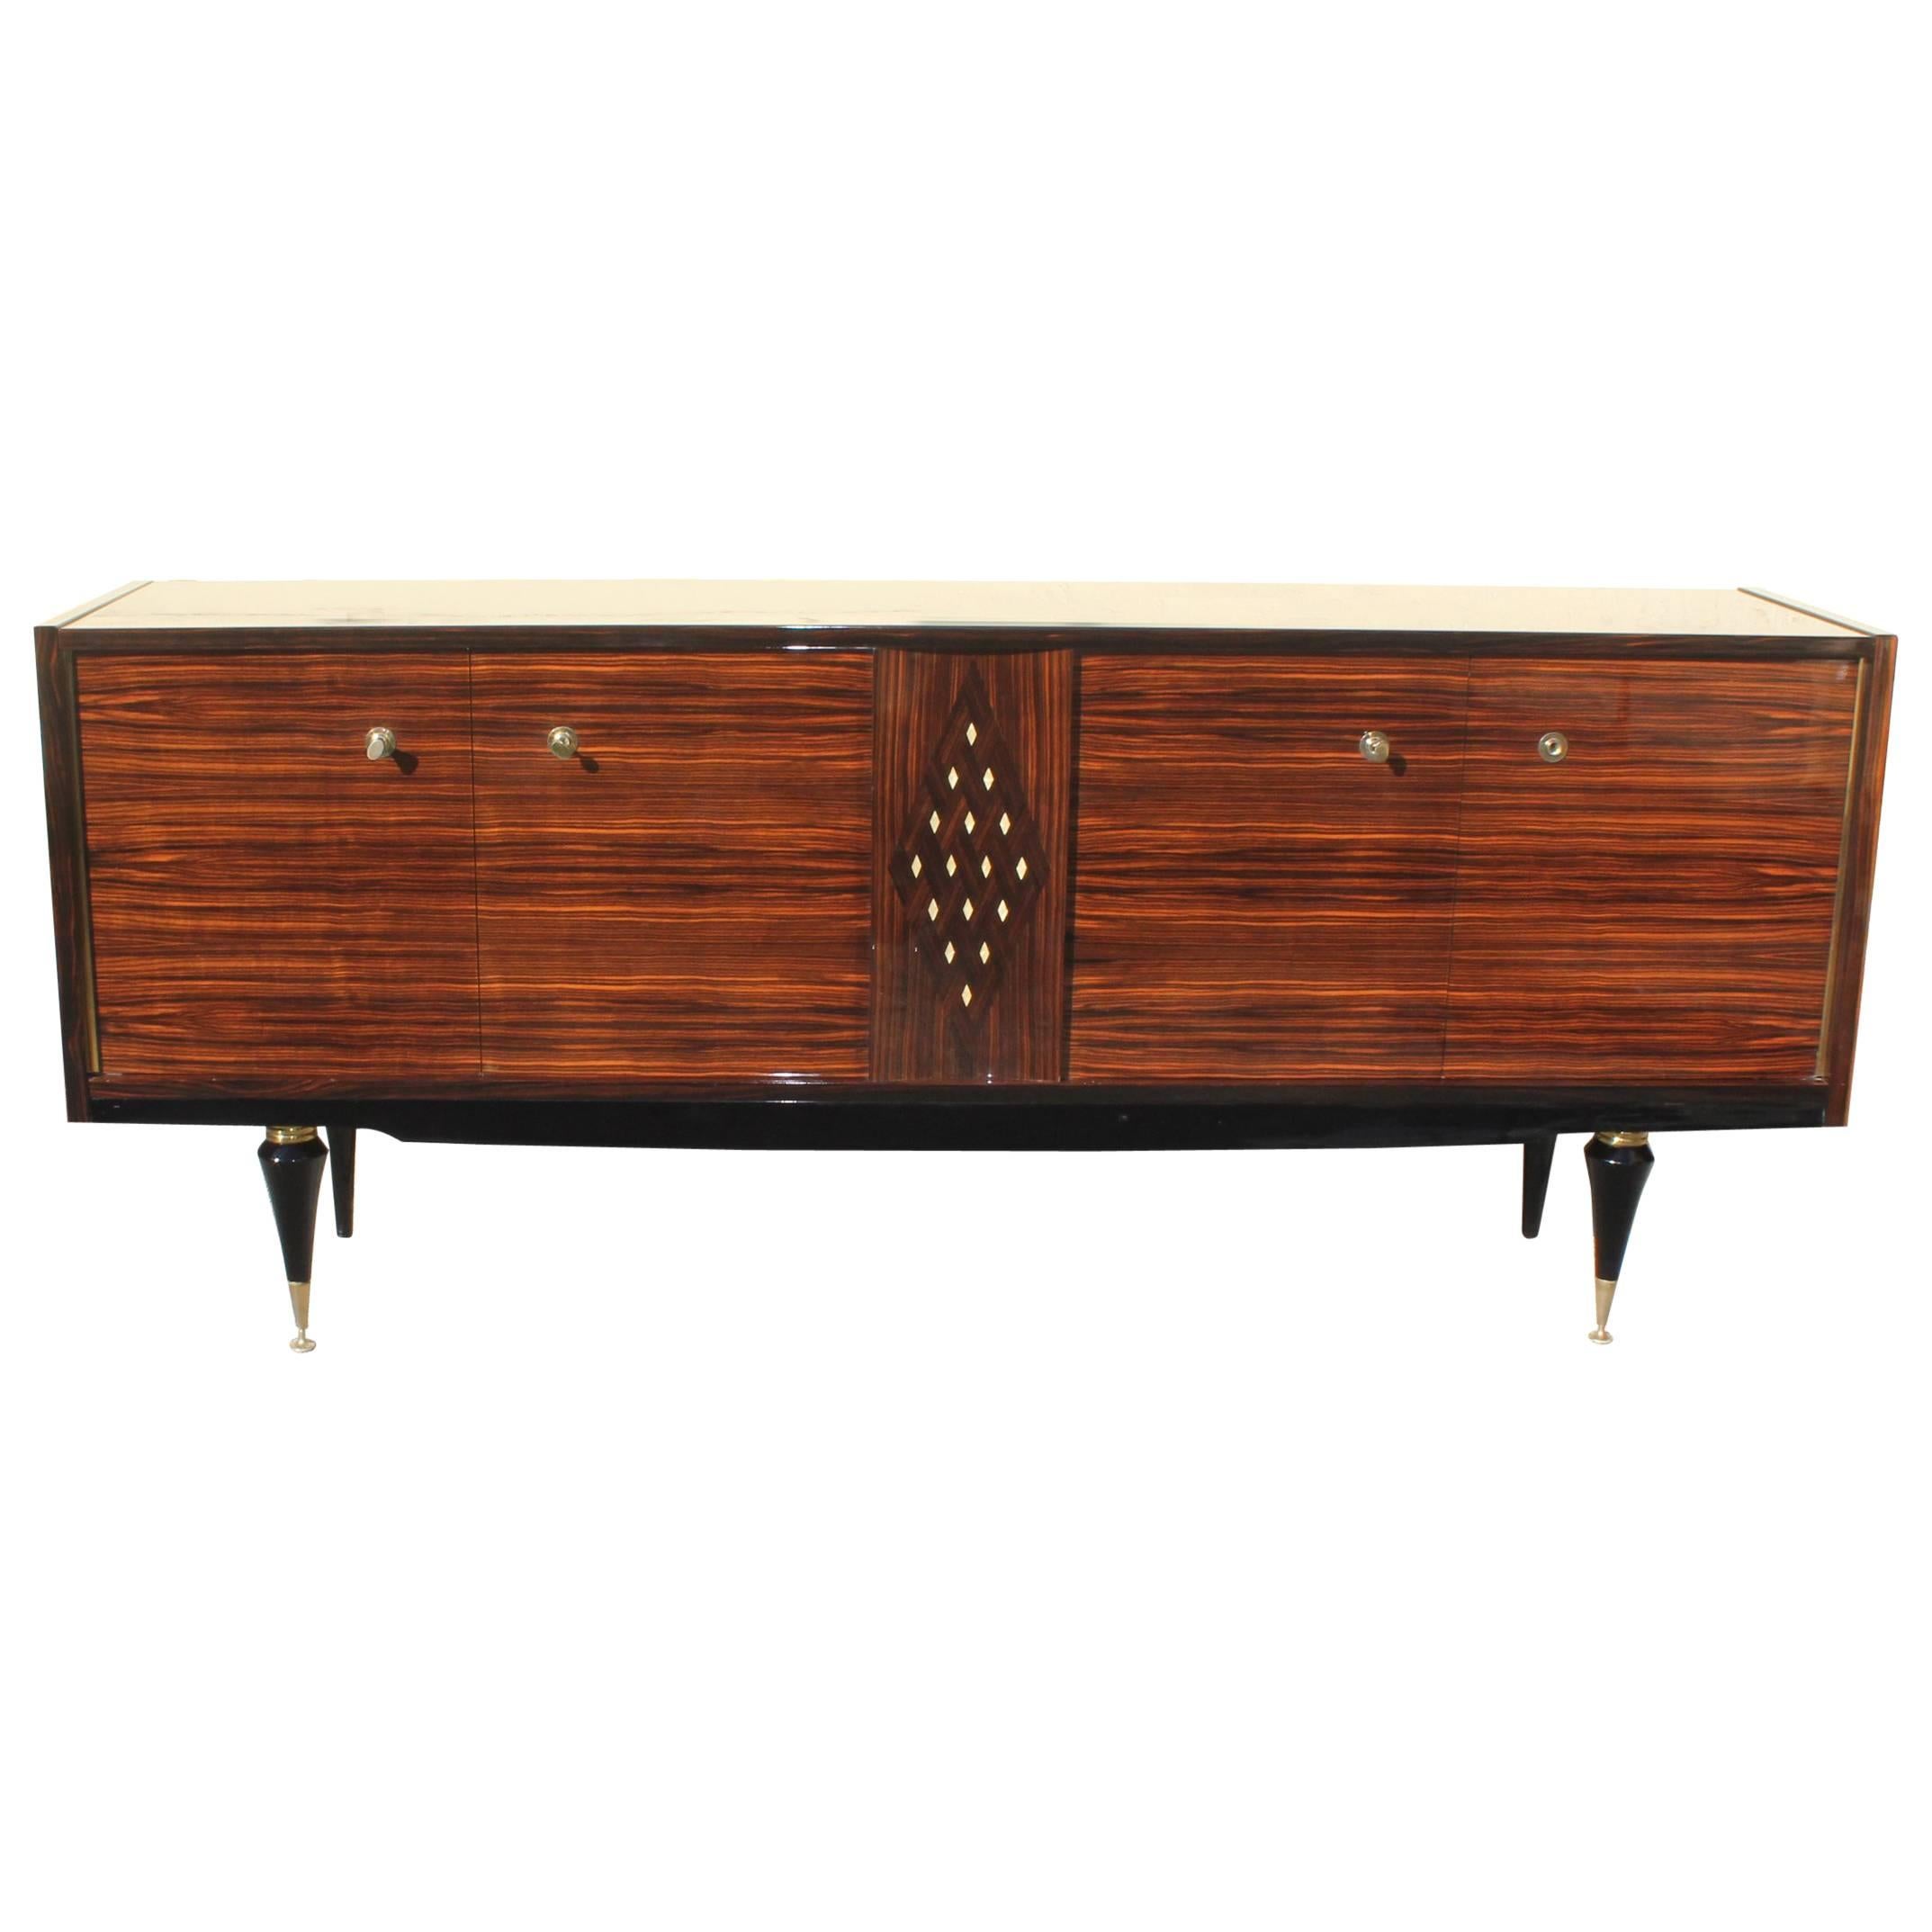 French Art Deco Macassar Sideboard with Diamond Mother-of-Pearl Center